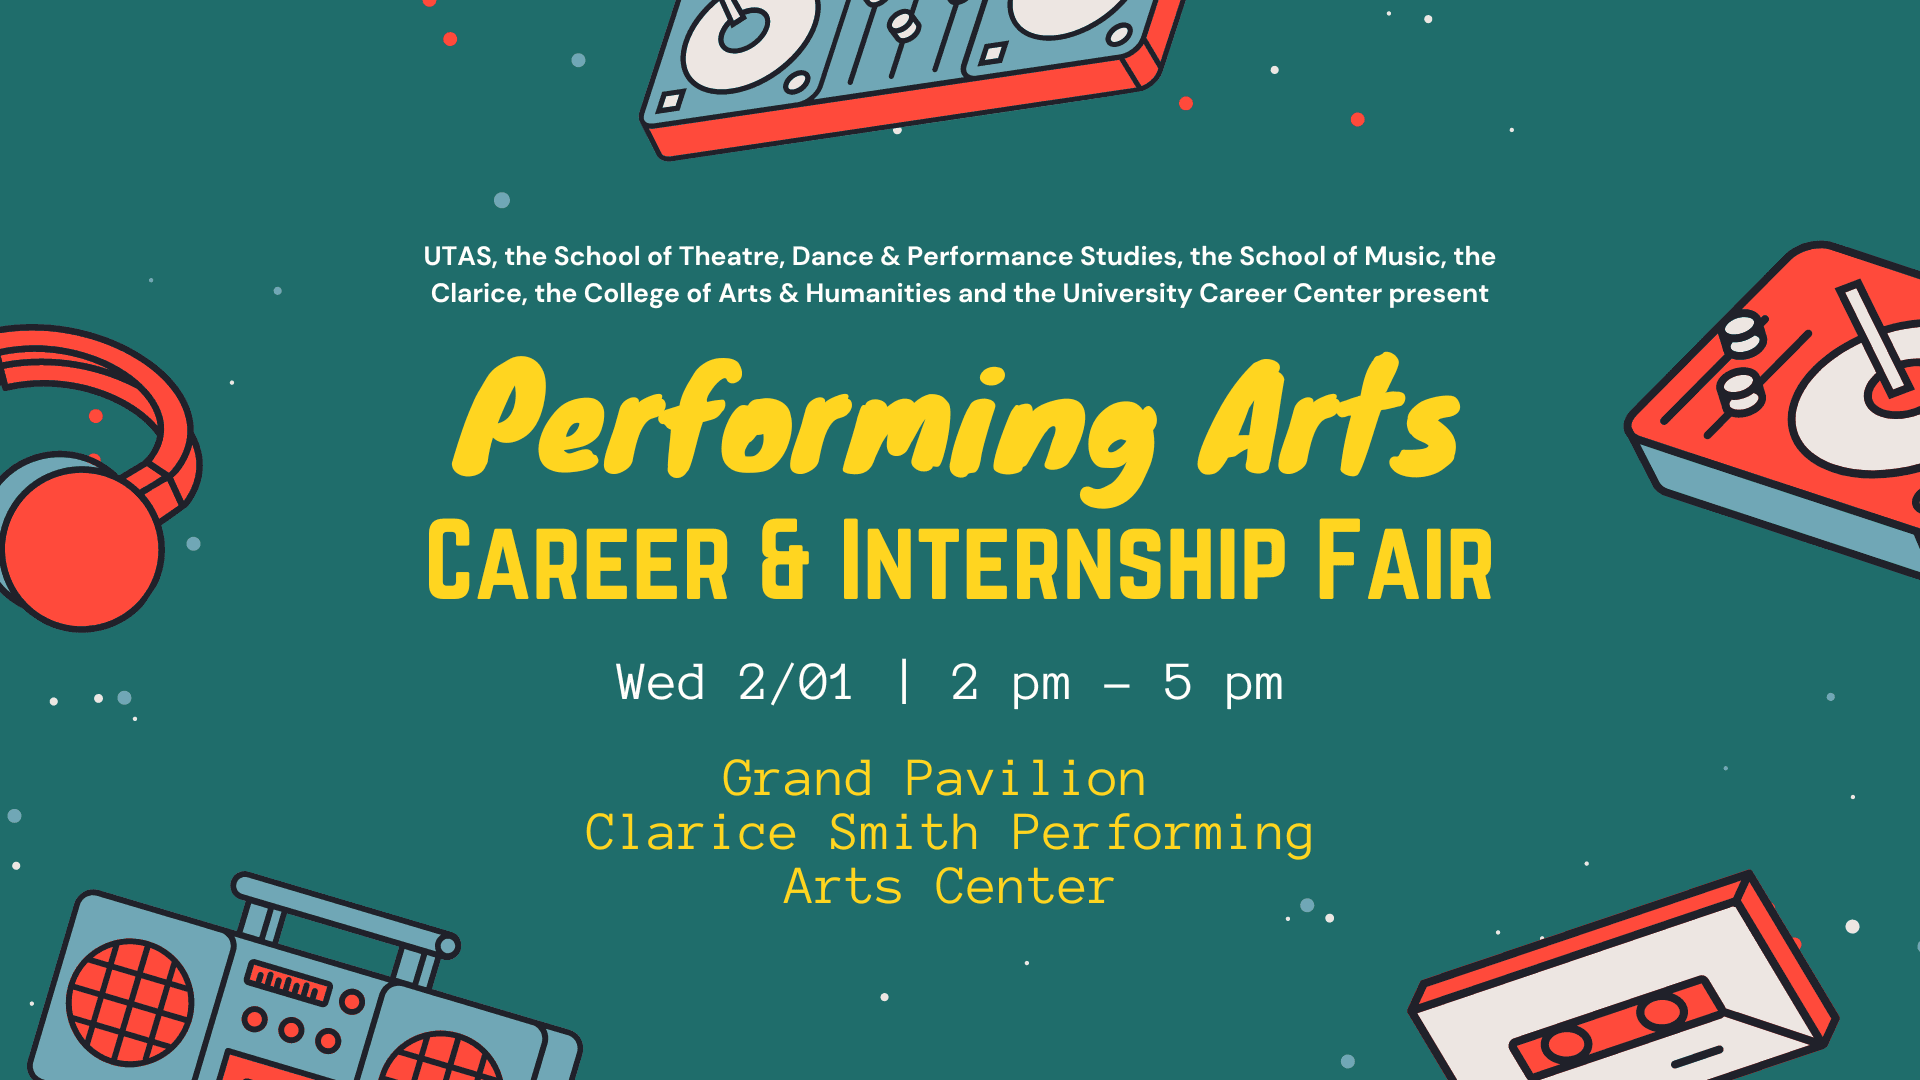 A promotional image for the performing arts career and internship fair.